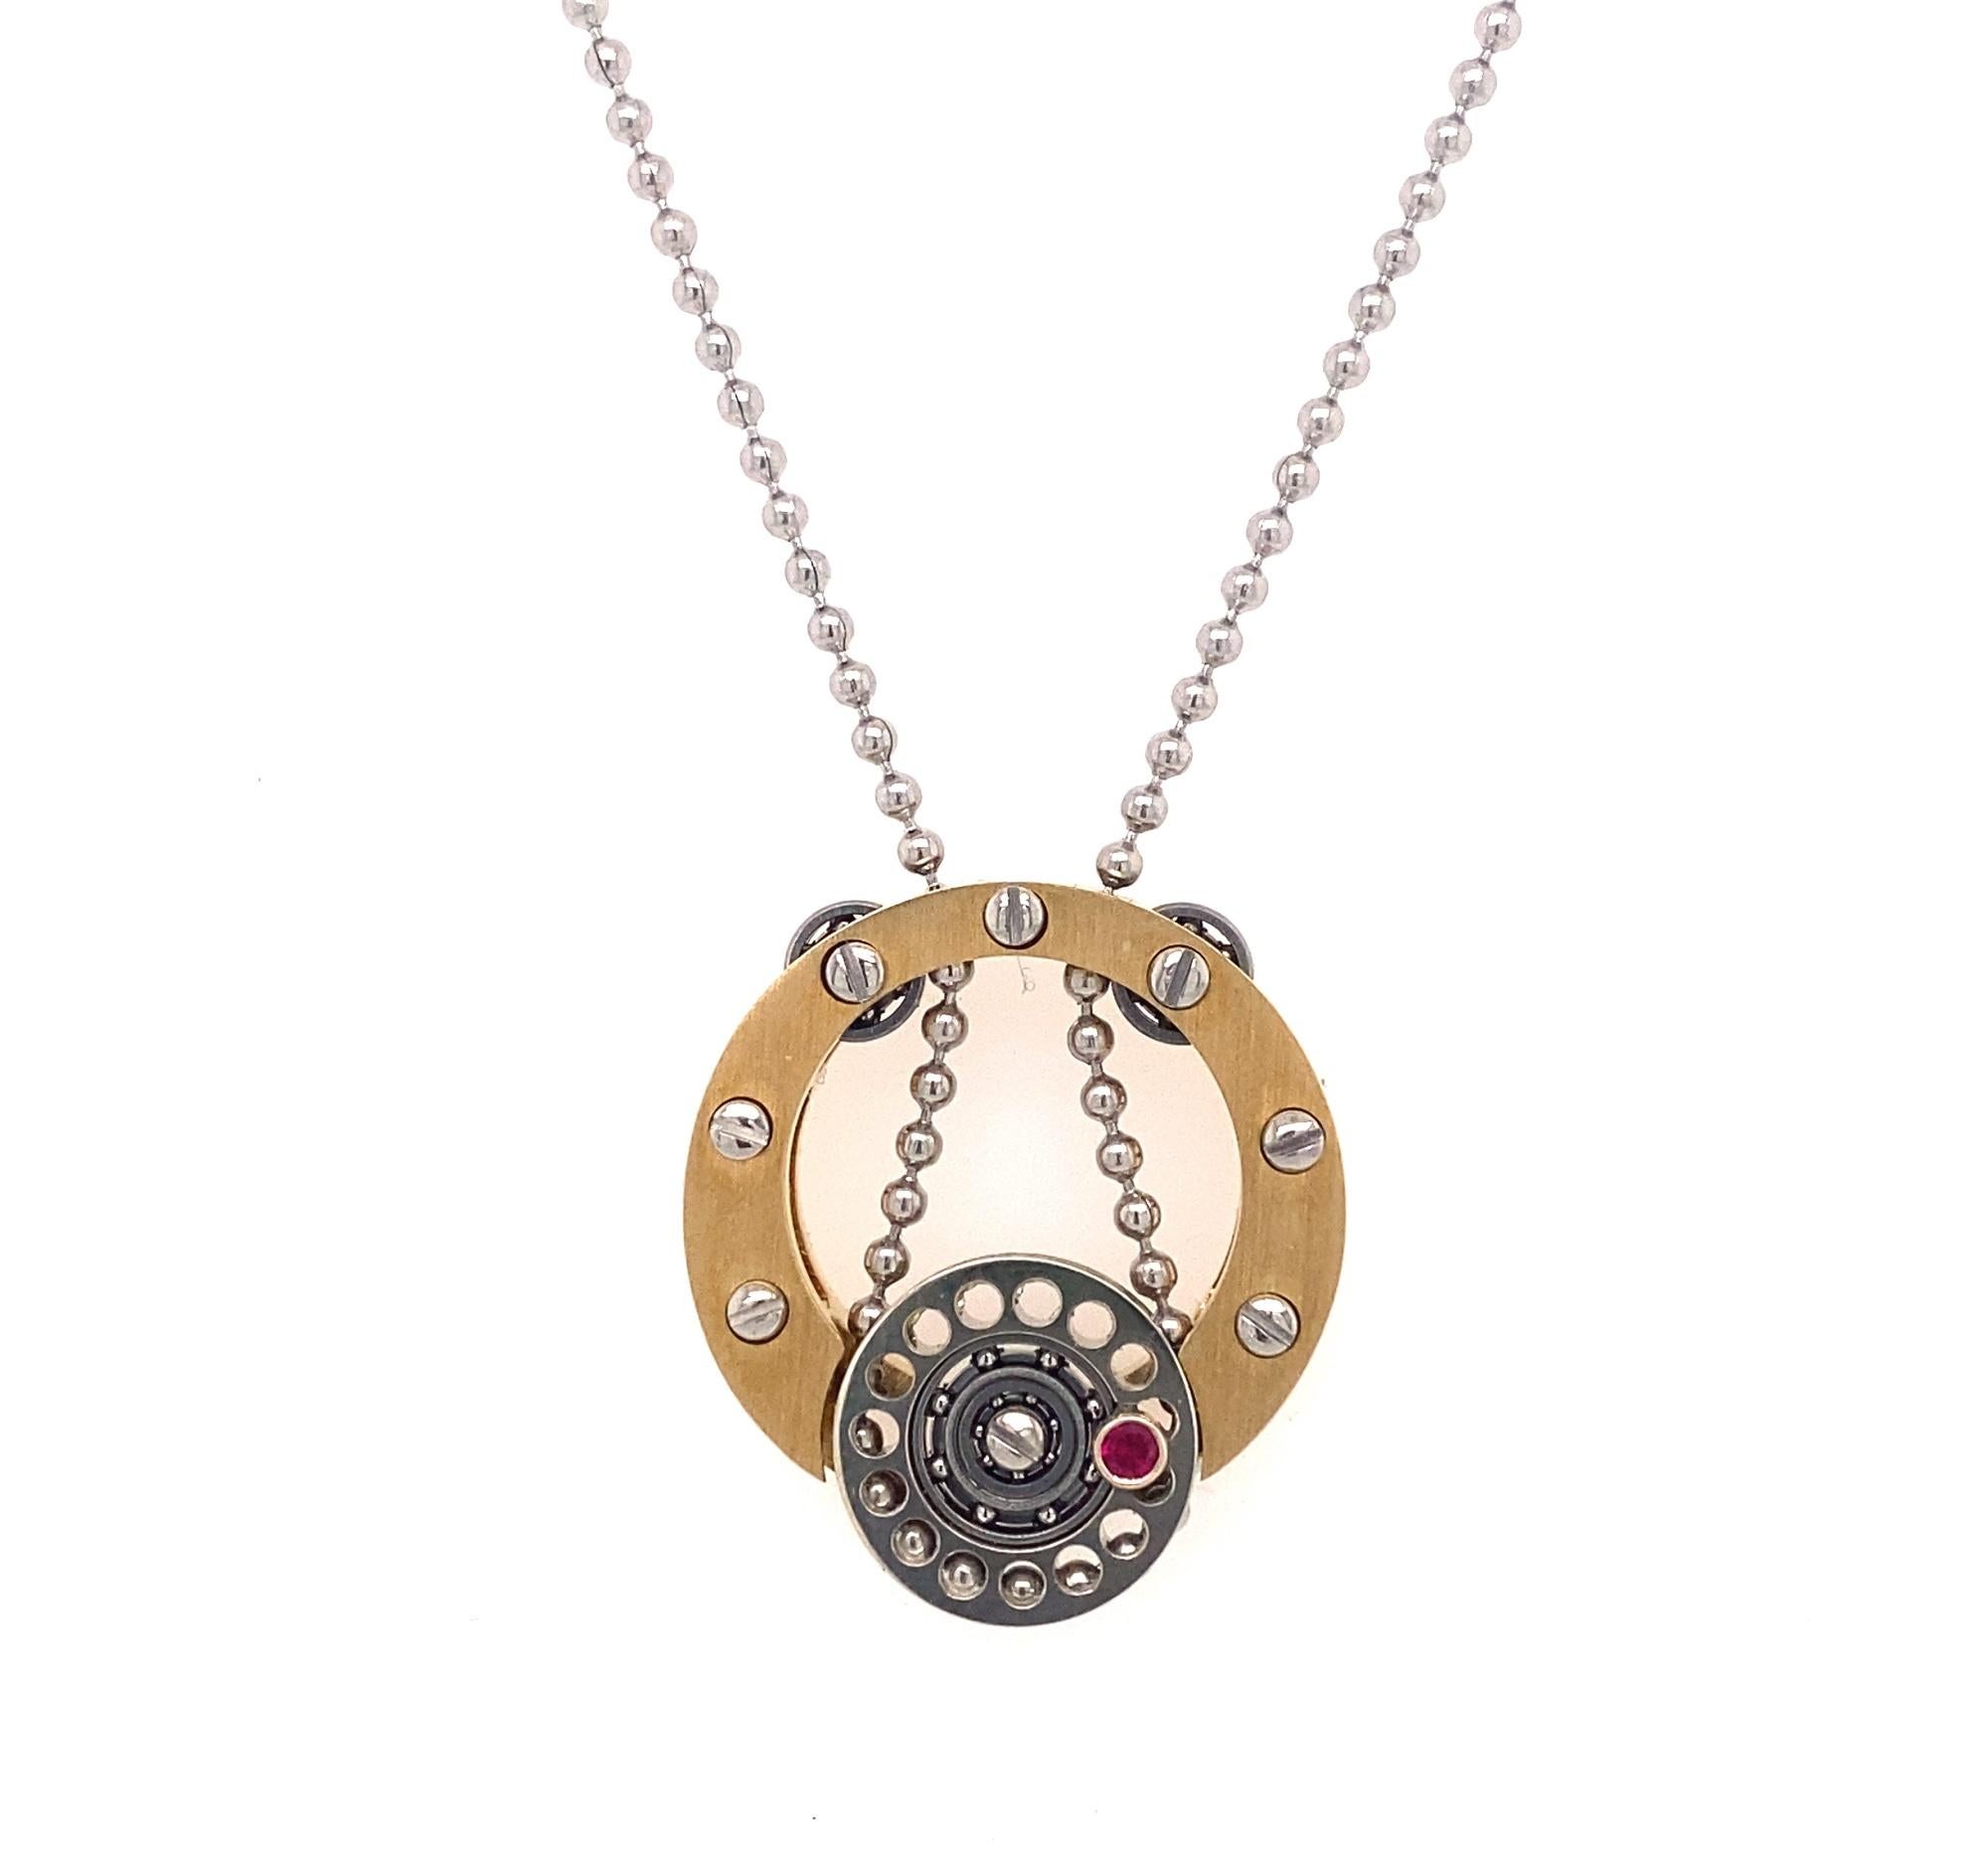 This is a stunning pendant by important jewelry designer Roberto Brun.  Roberto Brun specializes in making miniature machine jewelry.  The solid gold pendant has clock like gears that spin the center portion of the pendant when the chain moves.  The